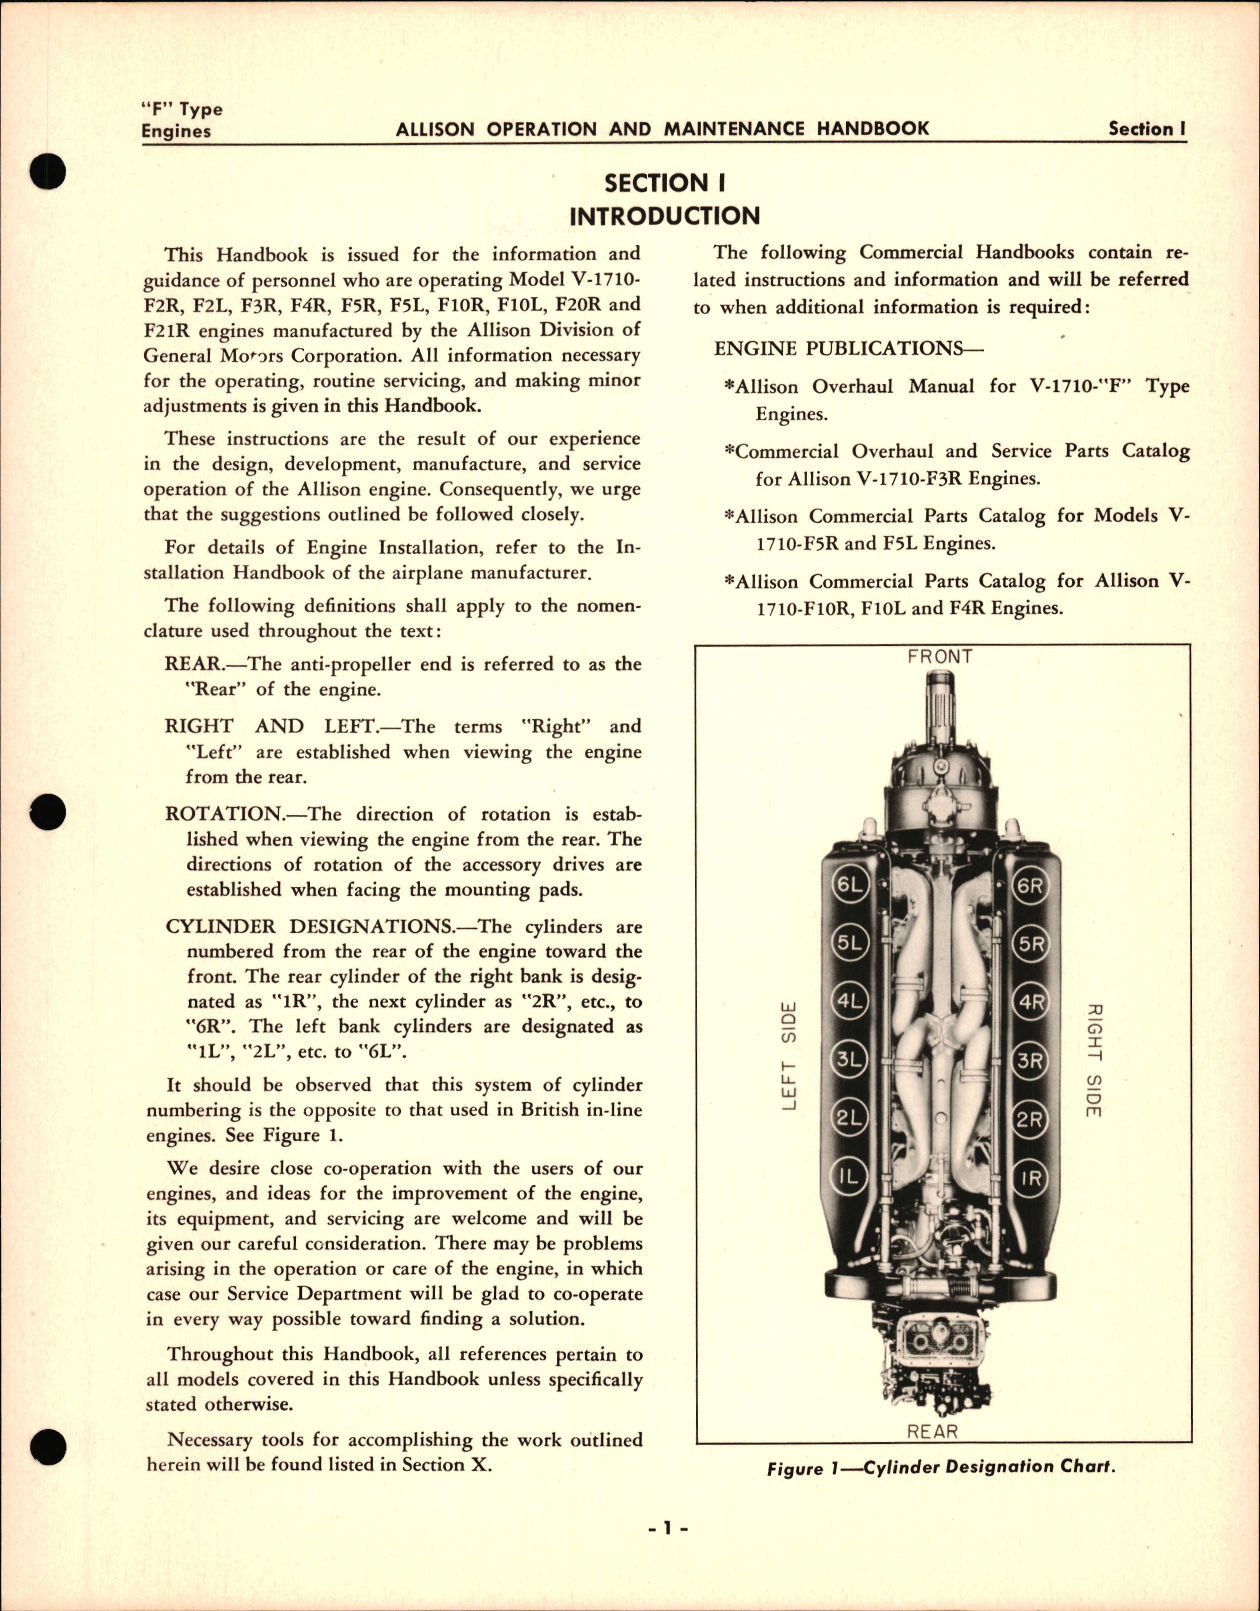 Sample page 7 from AirCorps Library document: Operation and Maintenance for Allison V-1710 F Type Engines